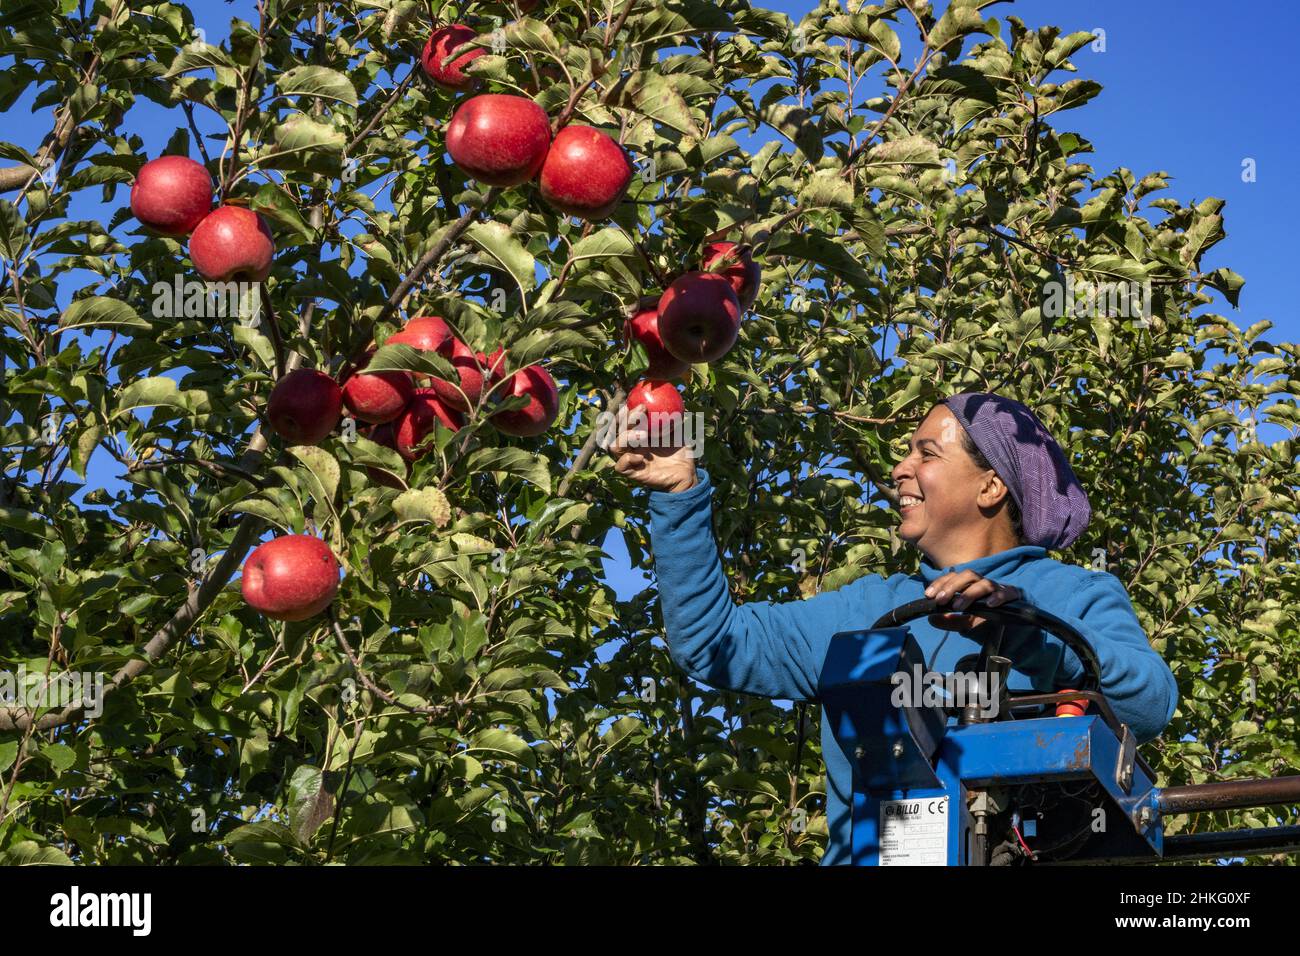 France, Herault, Saint Just, cofruid'oc is a co-op producing Pink Lady apples Stock Photo